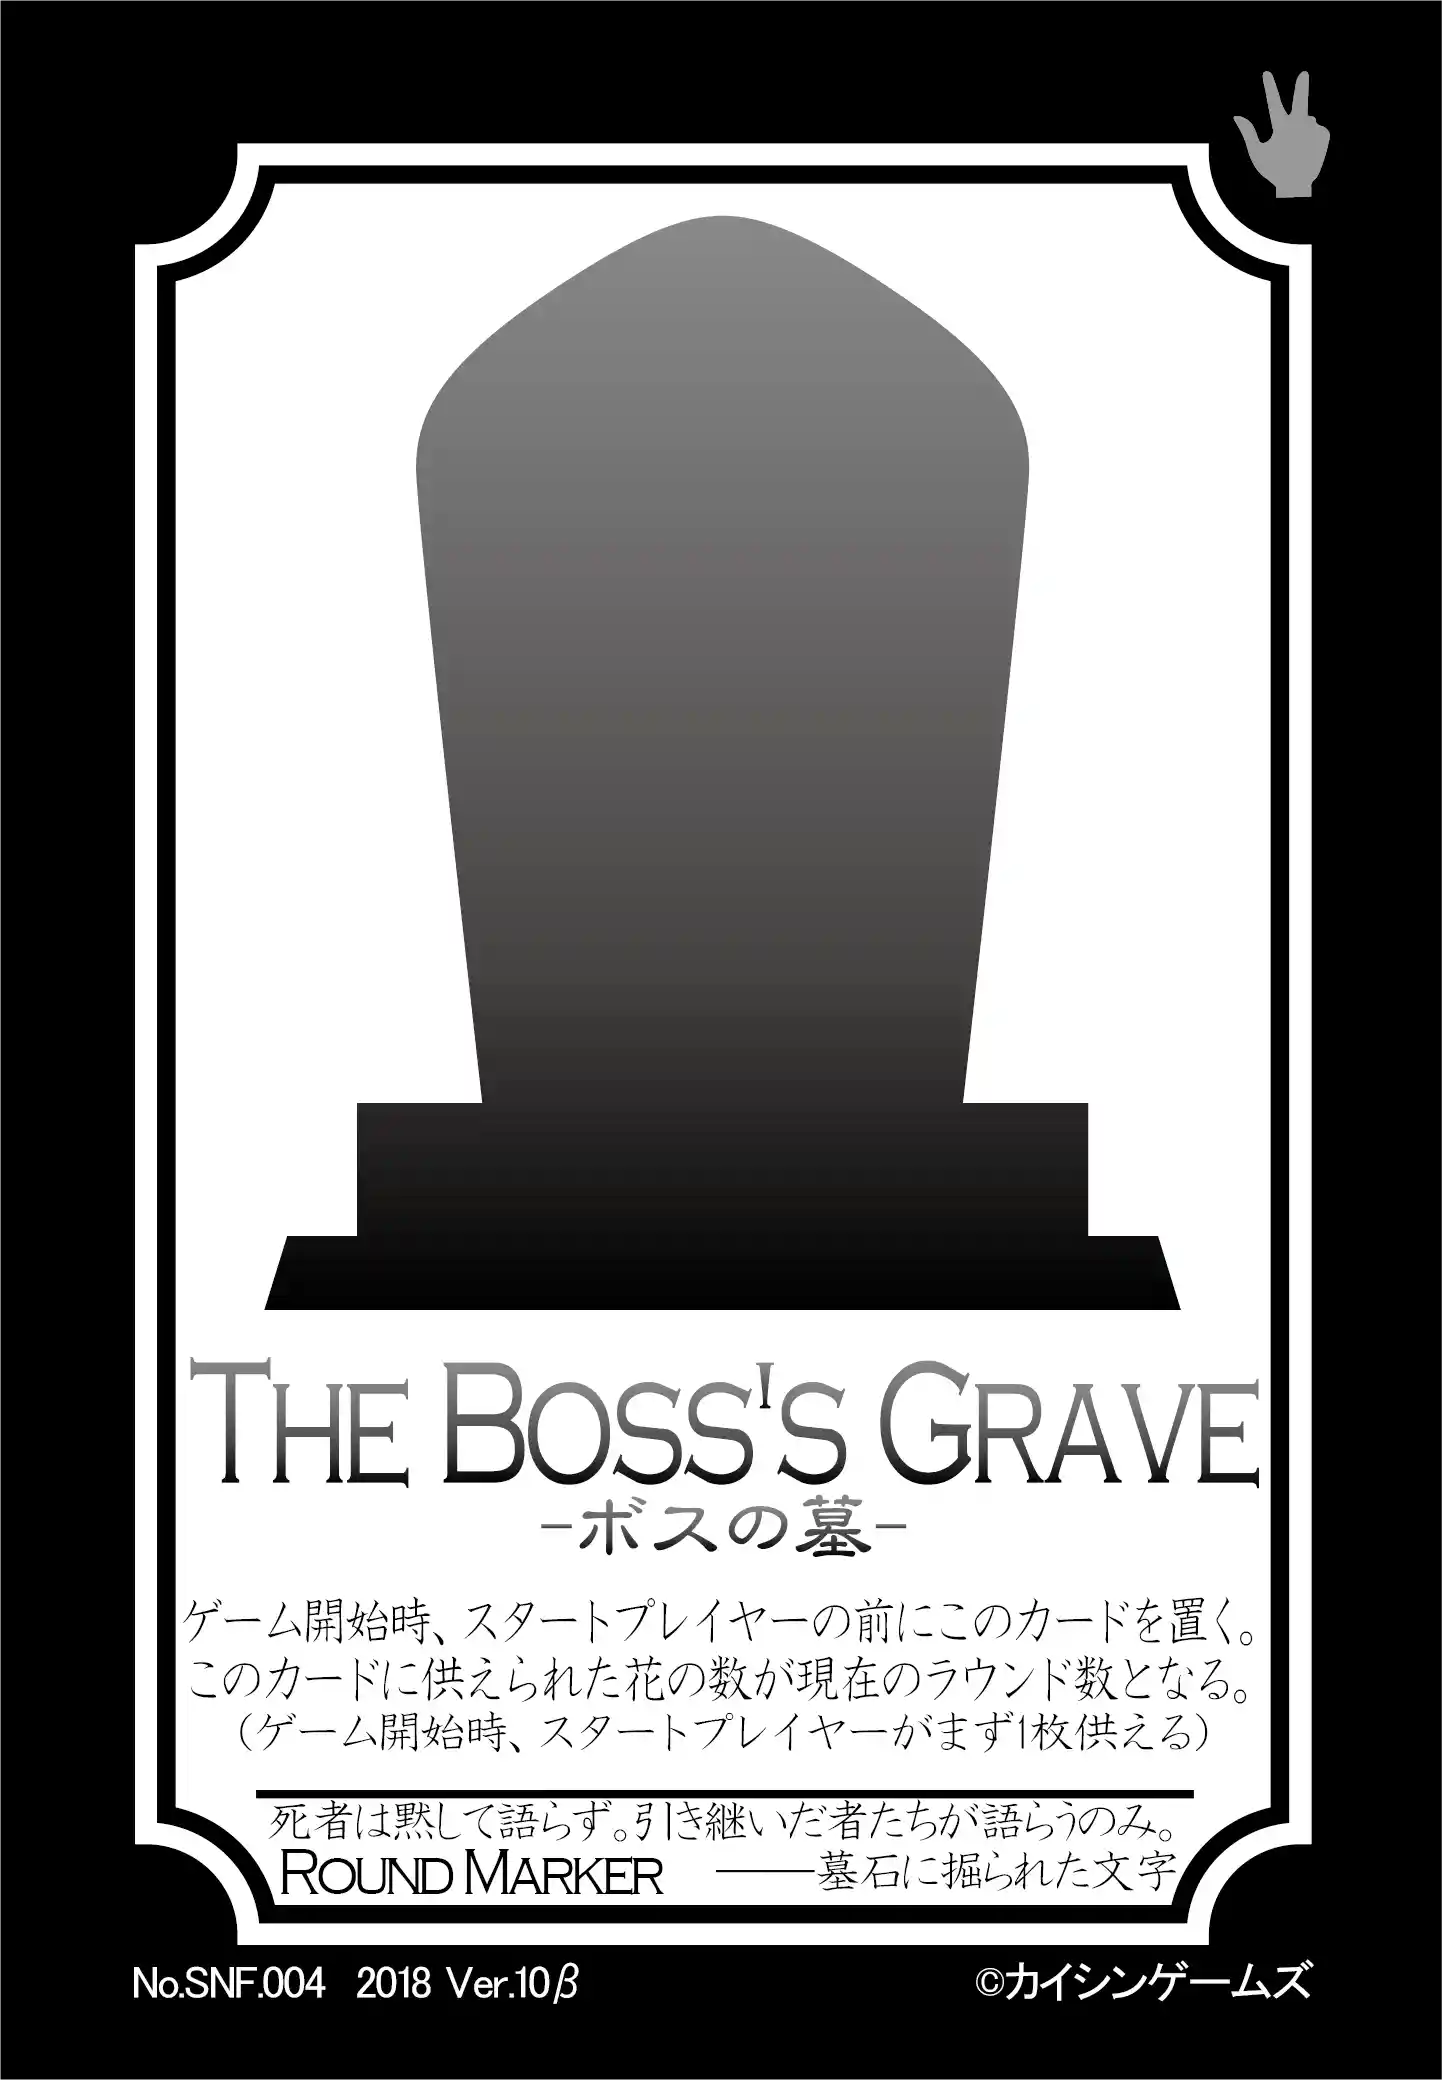 THE BOSS'S GRAVE